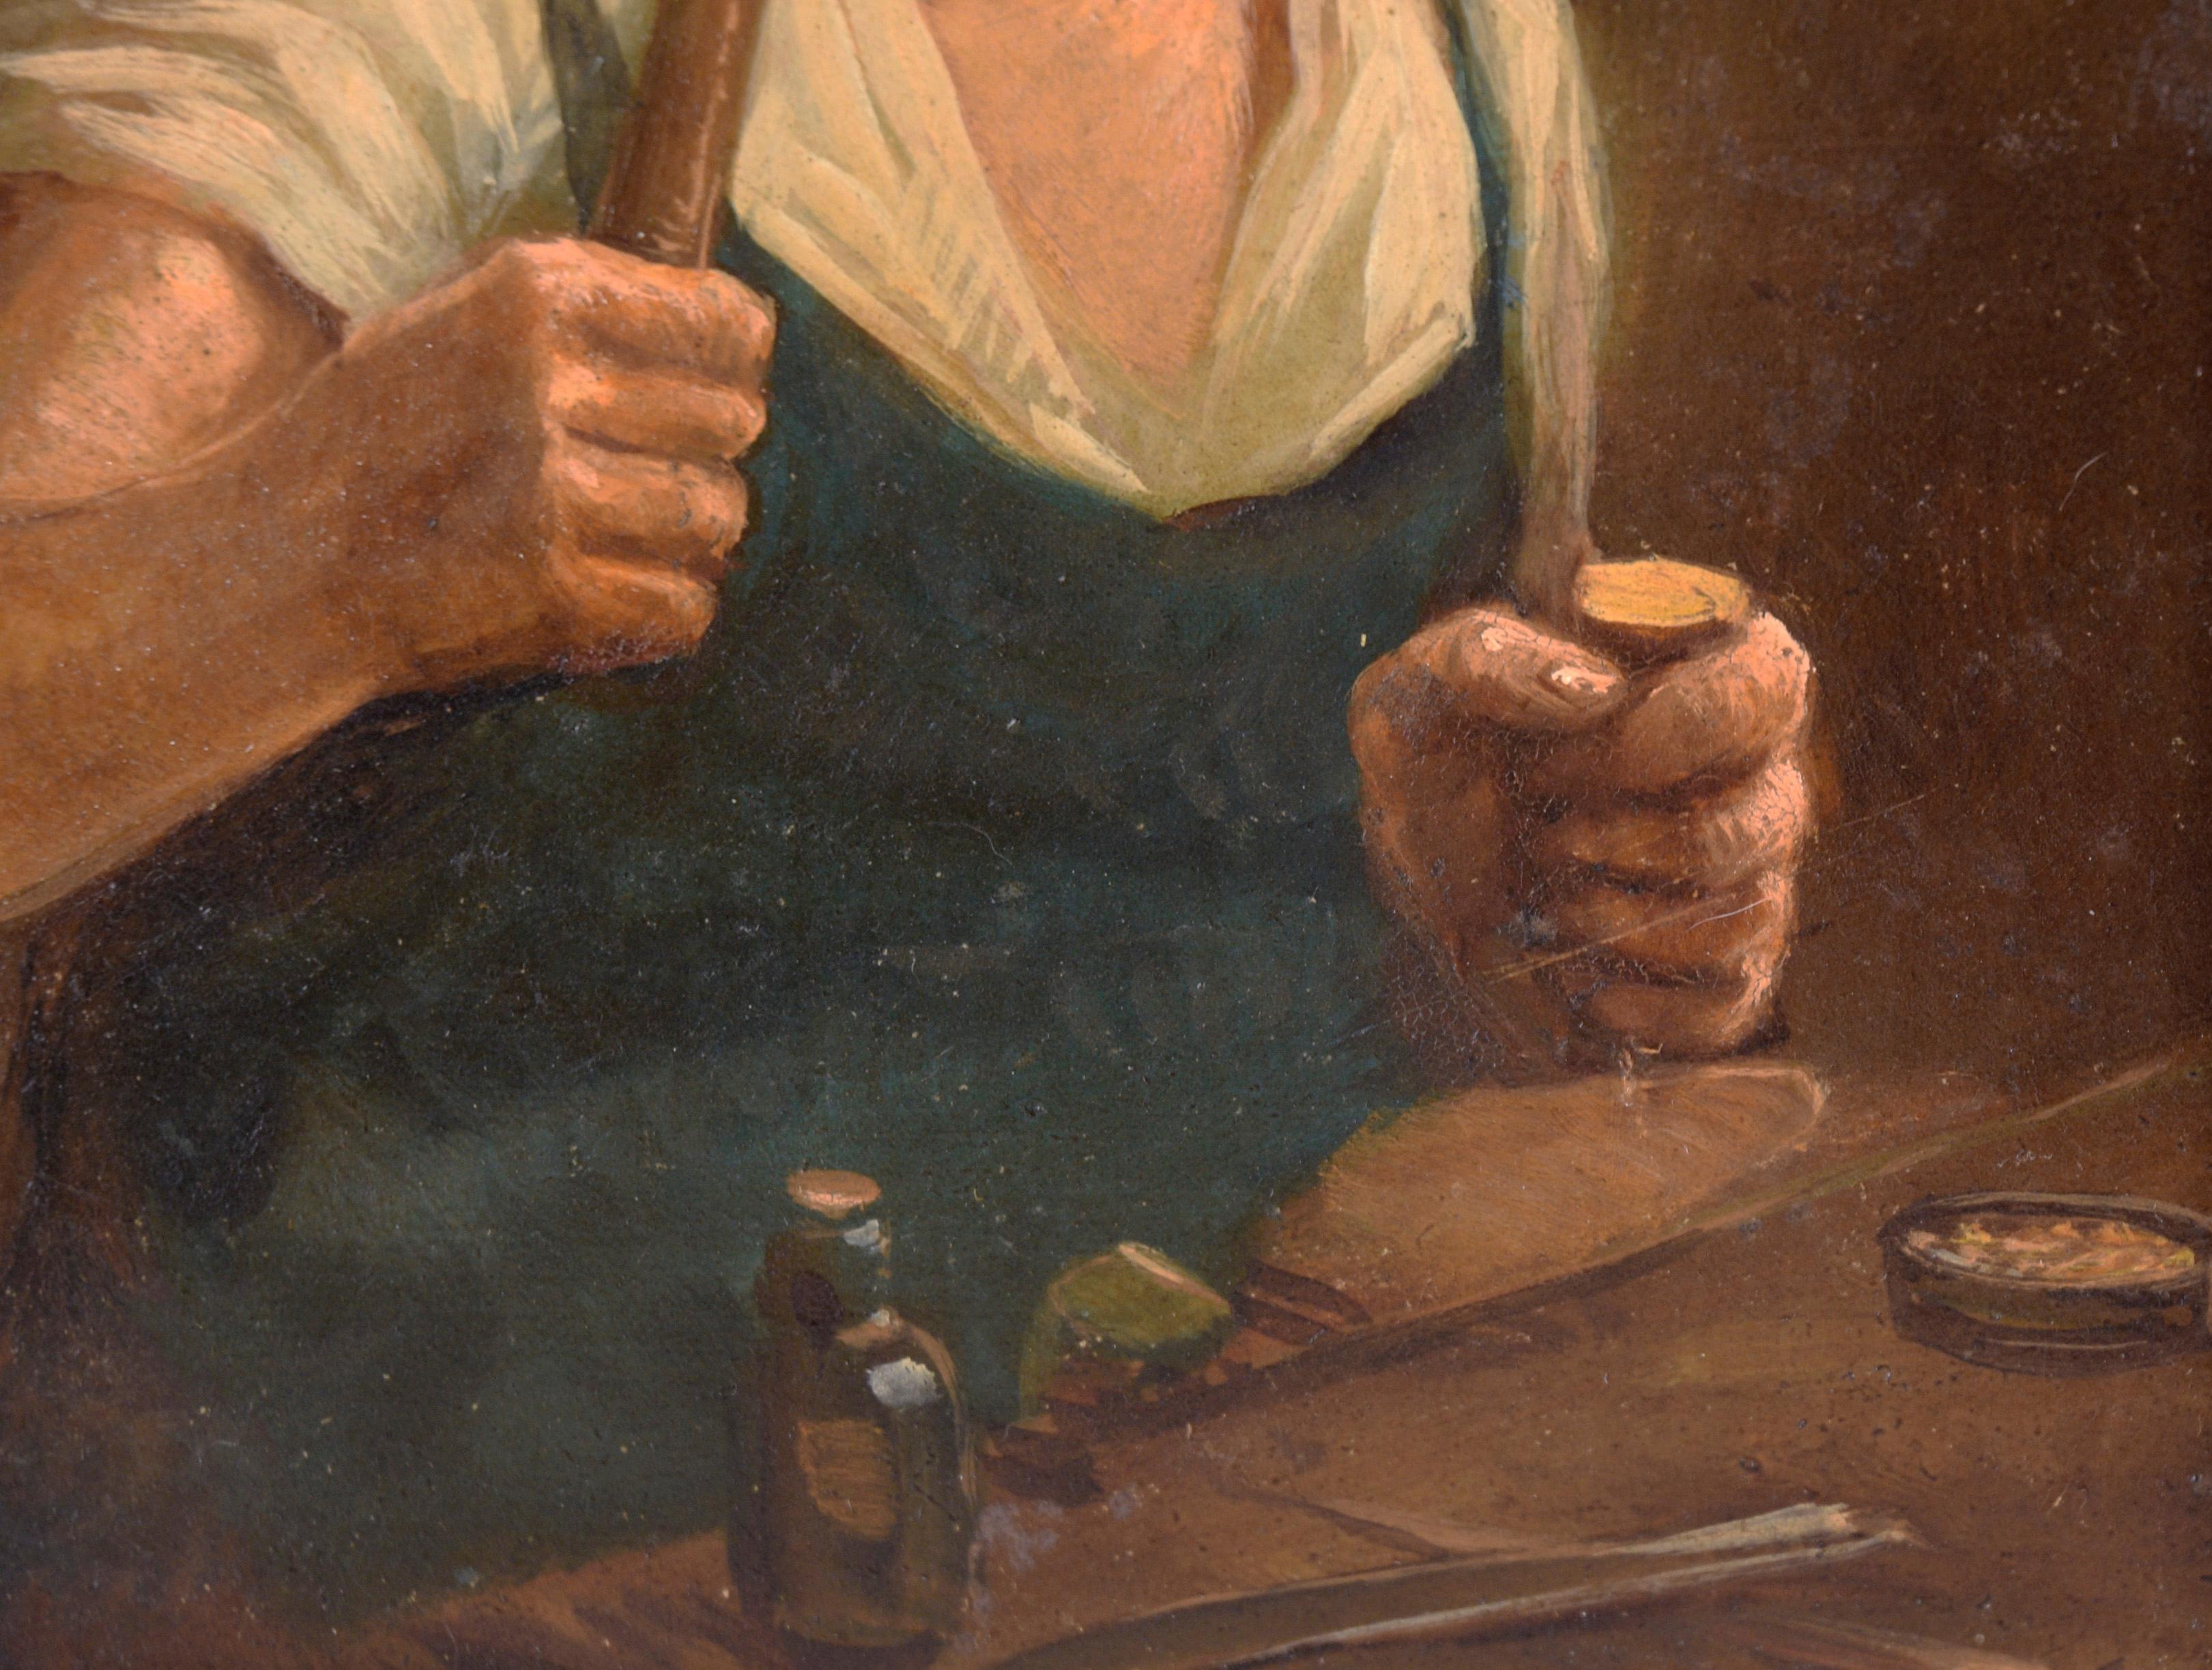 Shoemaker at Work - Portrait in Oil on Masonite For Sale 2